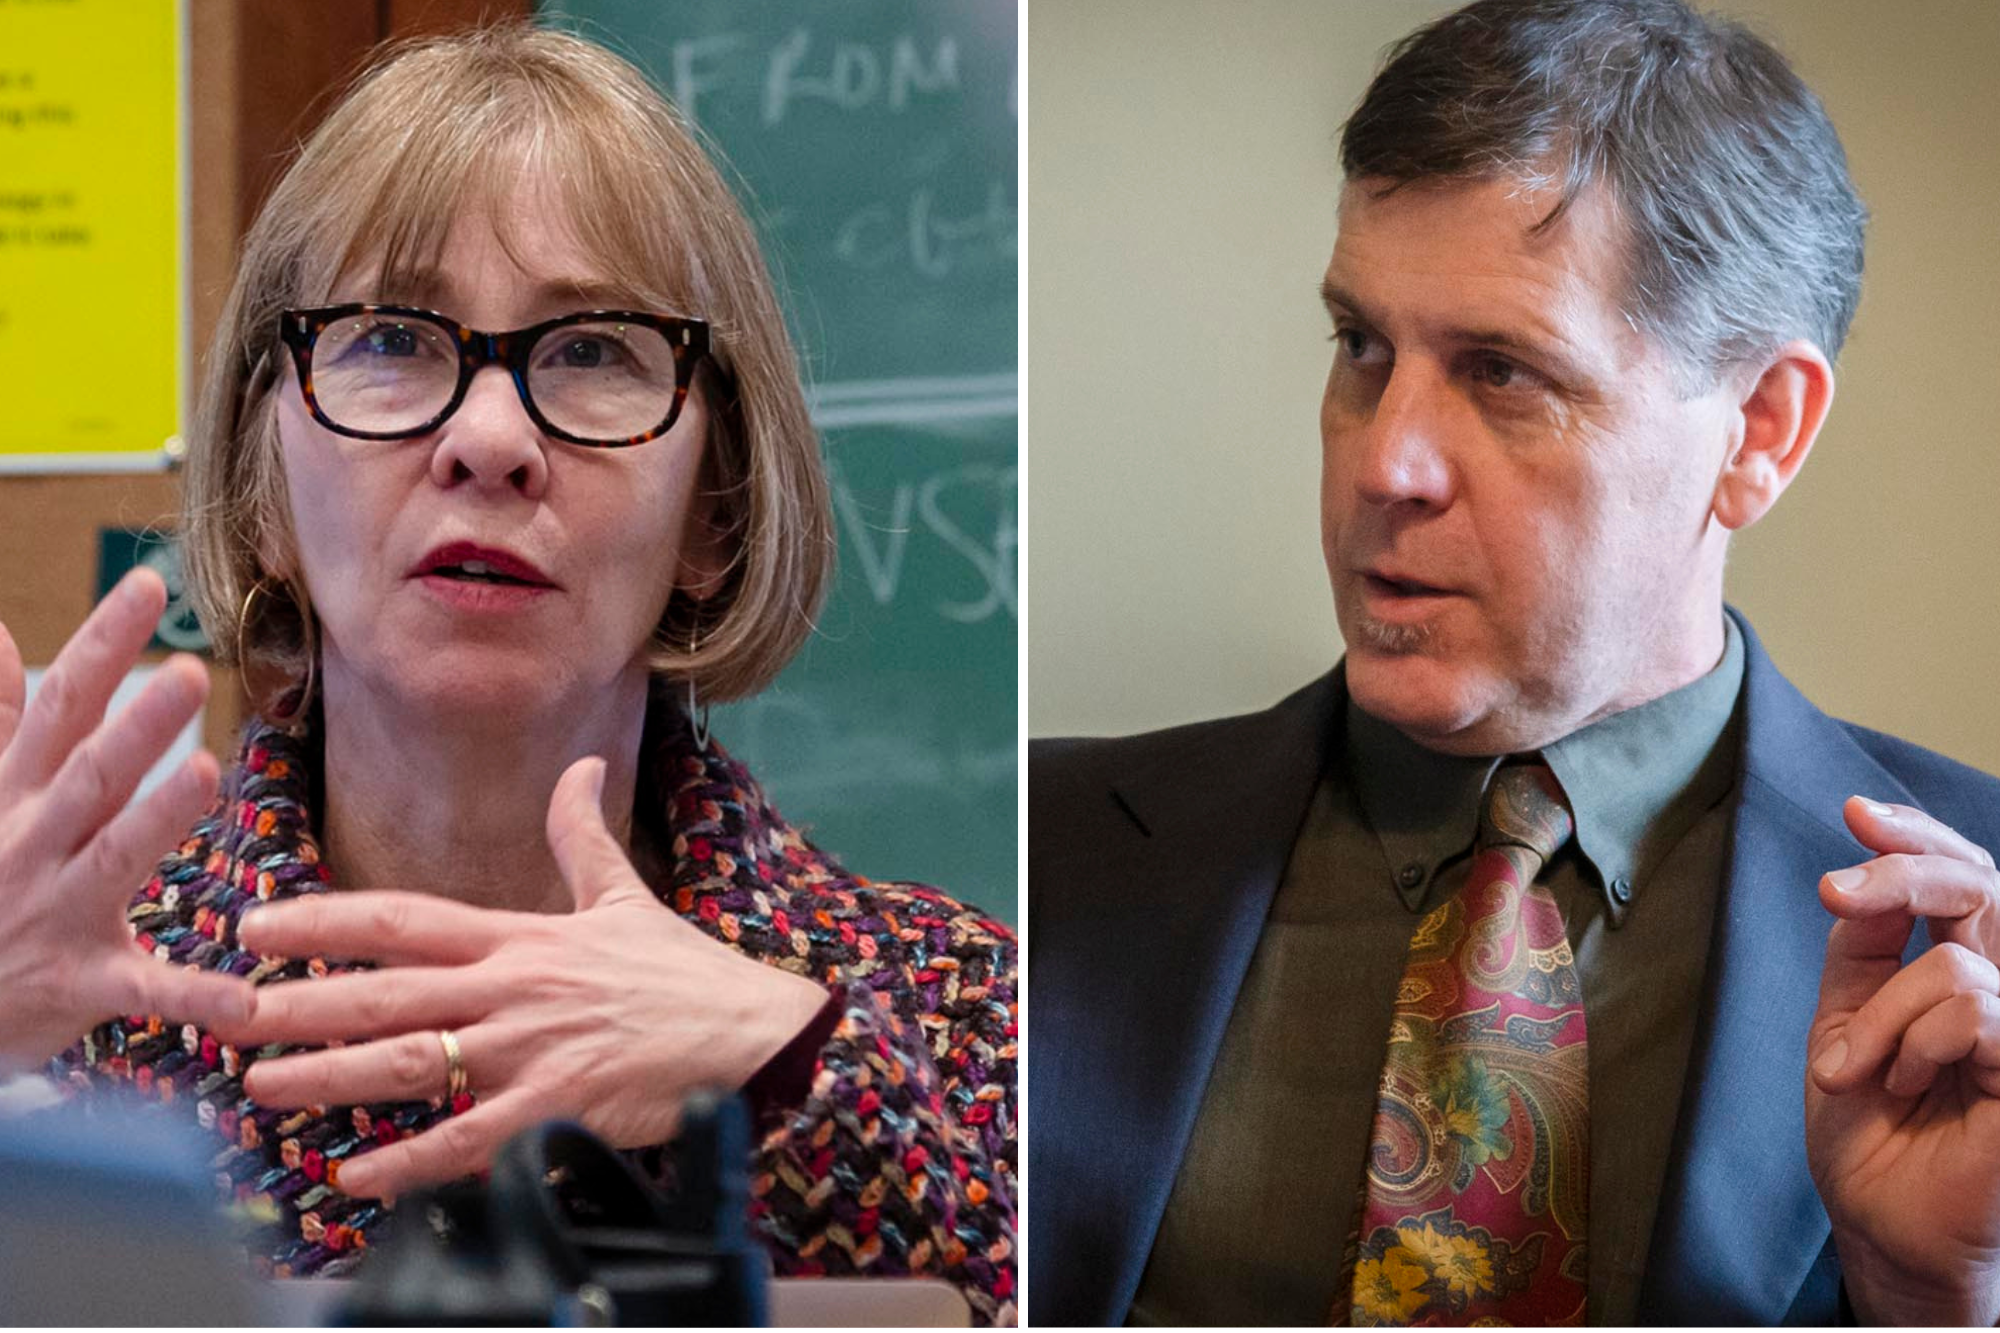 Split image of a woman with glasses speaking in a classroom on the left, and a man in a suit with a patterned tie speaking on the right.